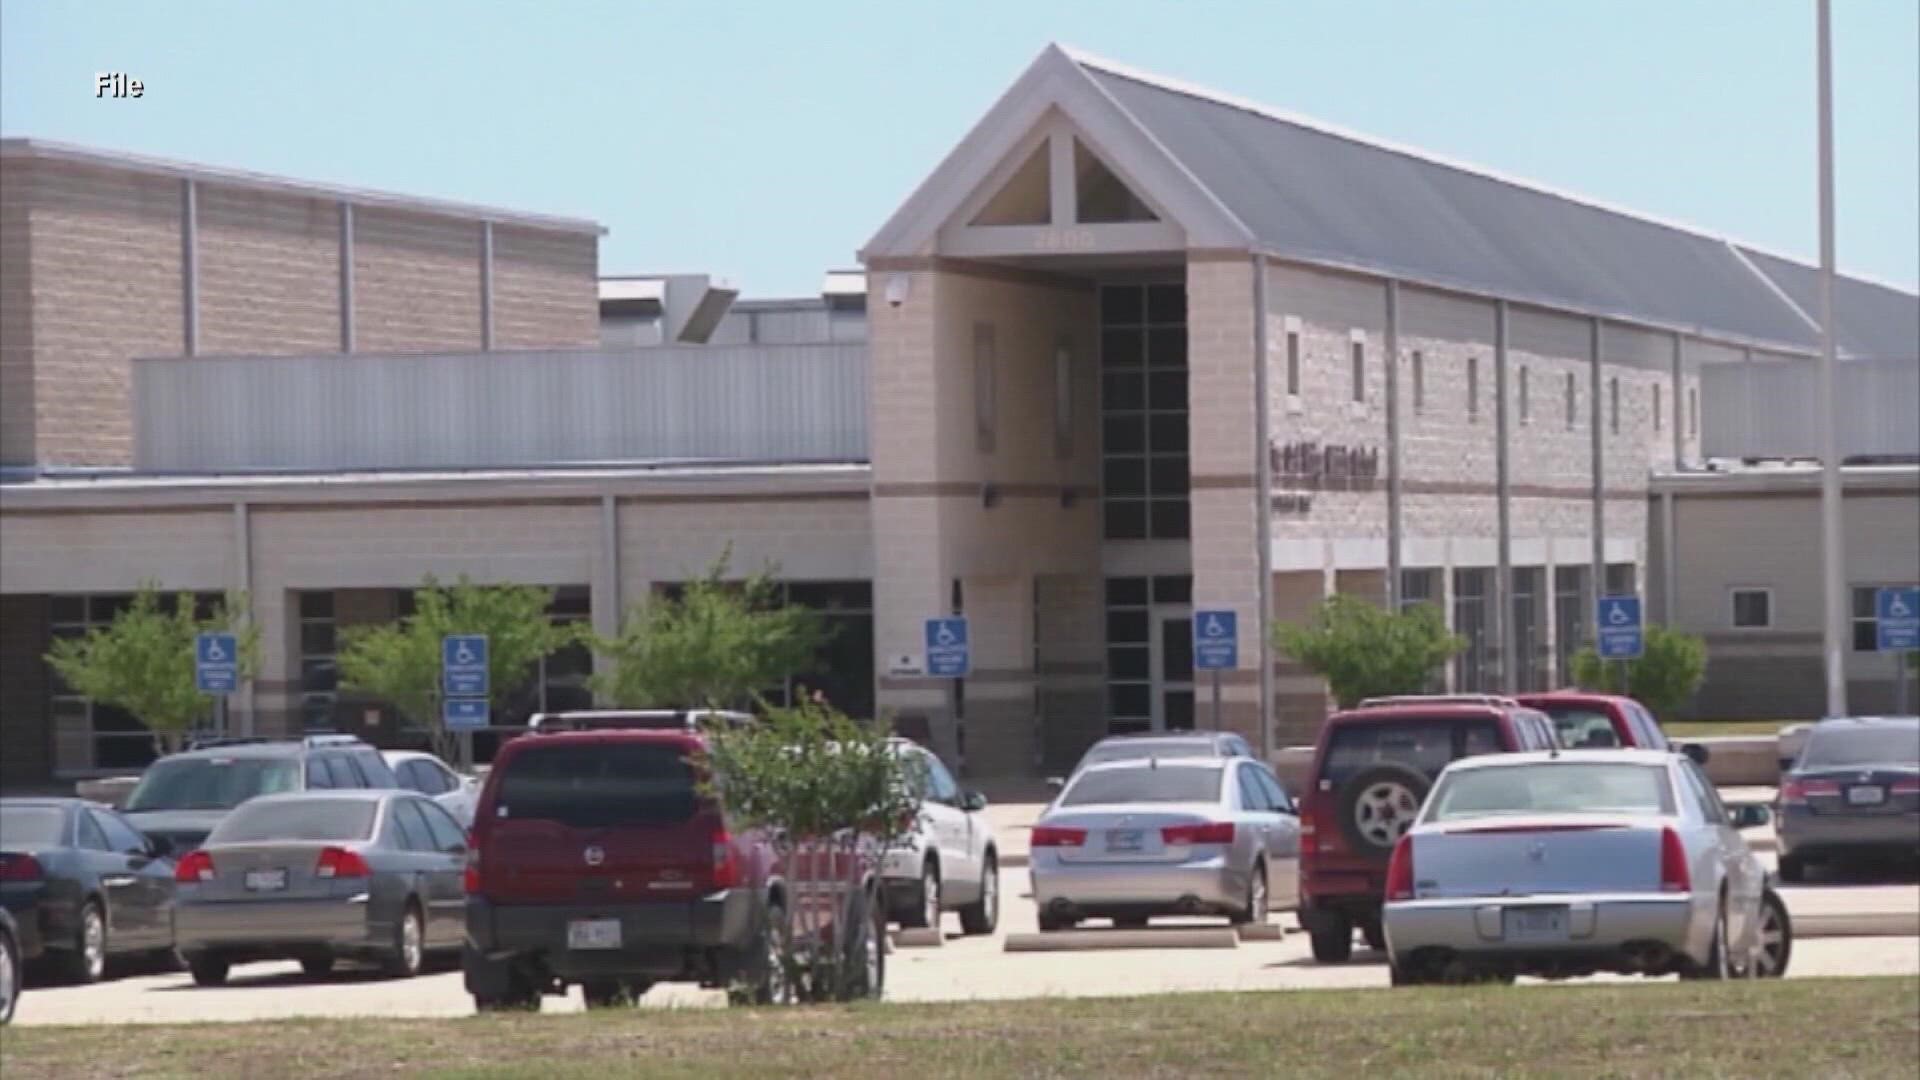 Killeen ISD like other schools are getting ready for the new school year with new safety and security protocols.